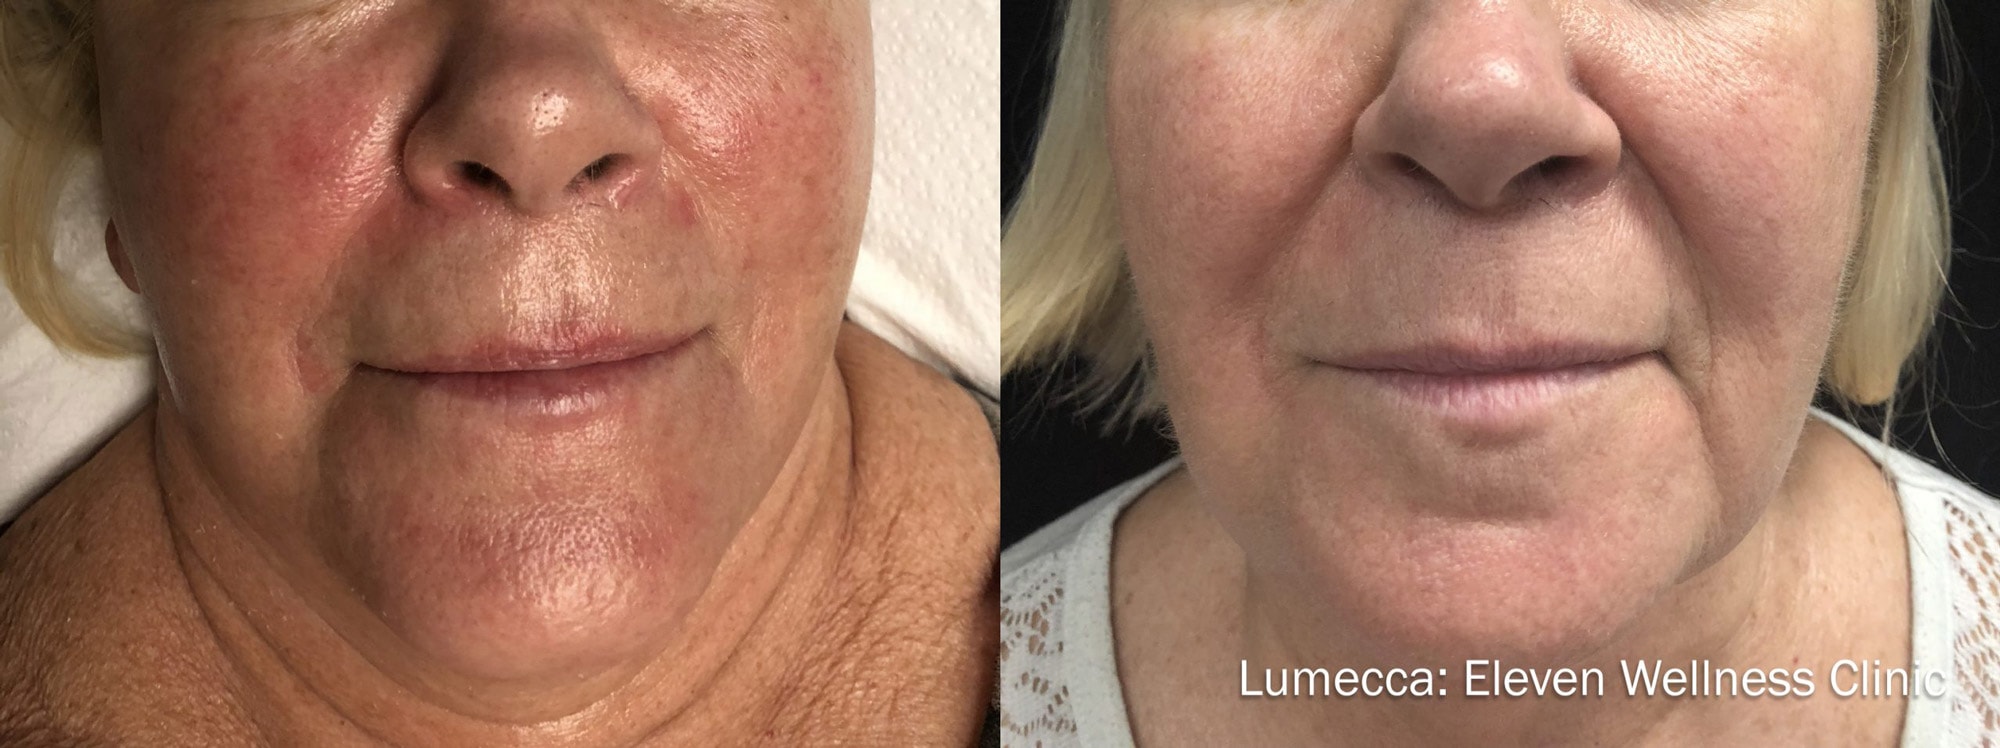 Before and After photos showing Lumecca treatments improving skin texture and removing rosacea on a woman’s face